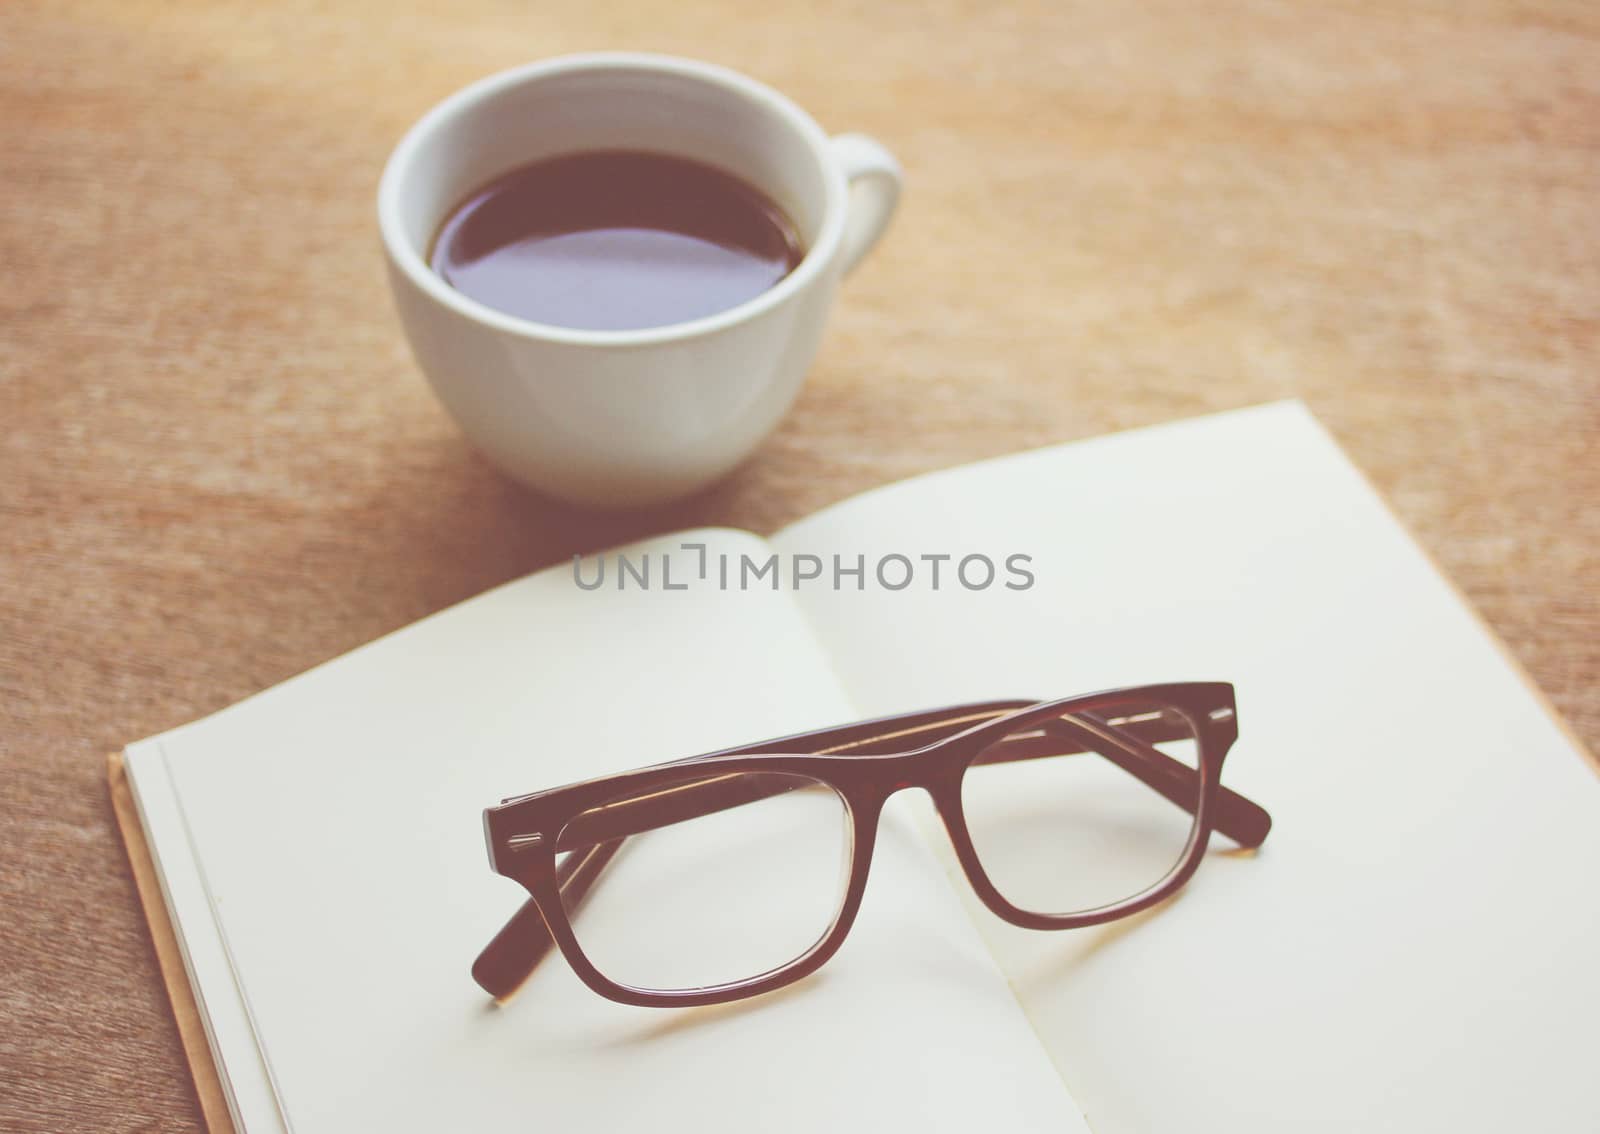 Eyeglasses on notebook and black coffee, retro filter effect by nuchylee